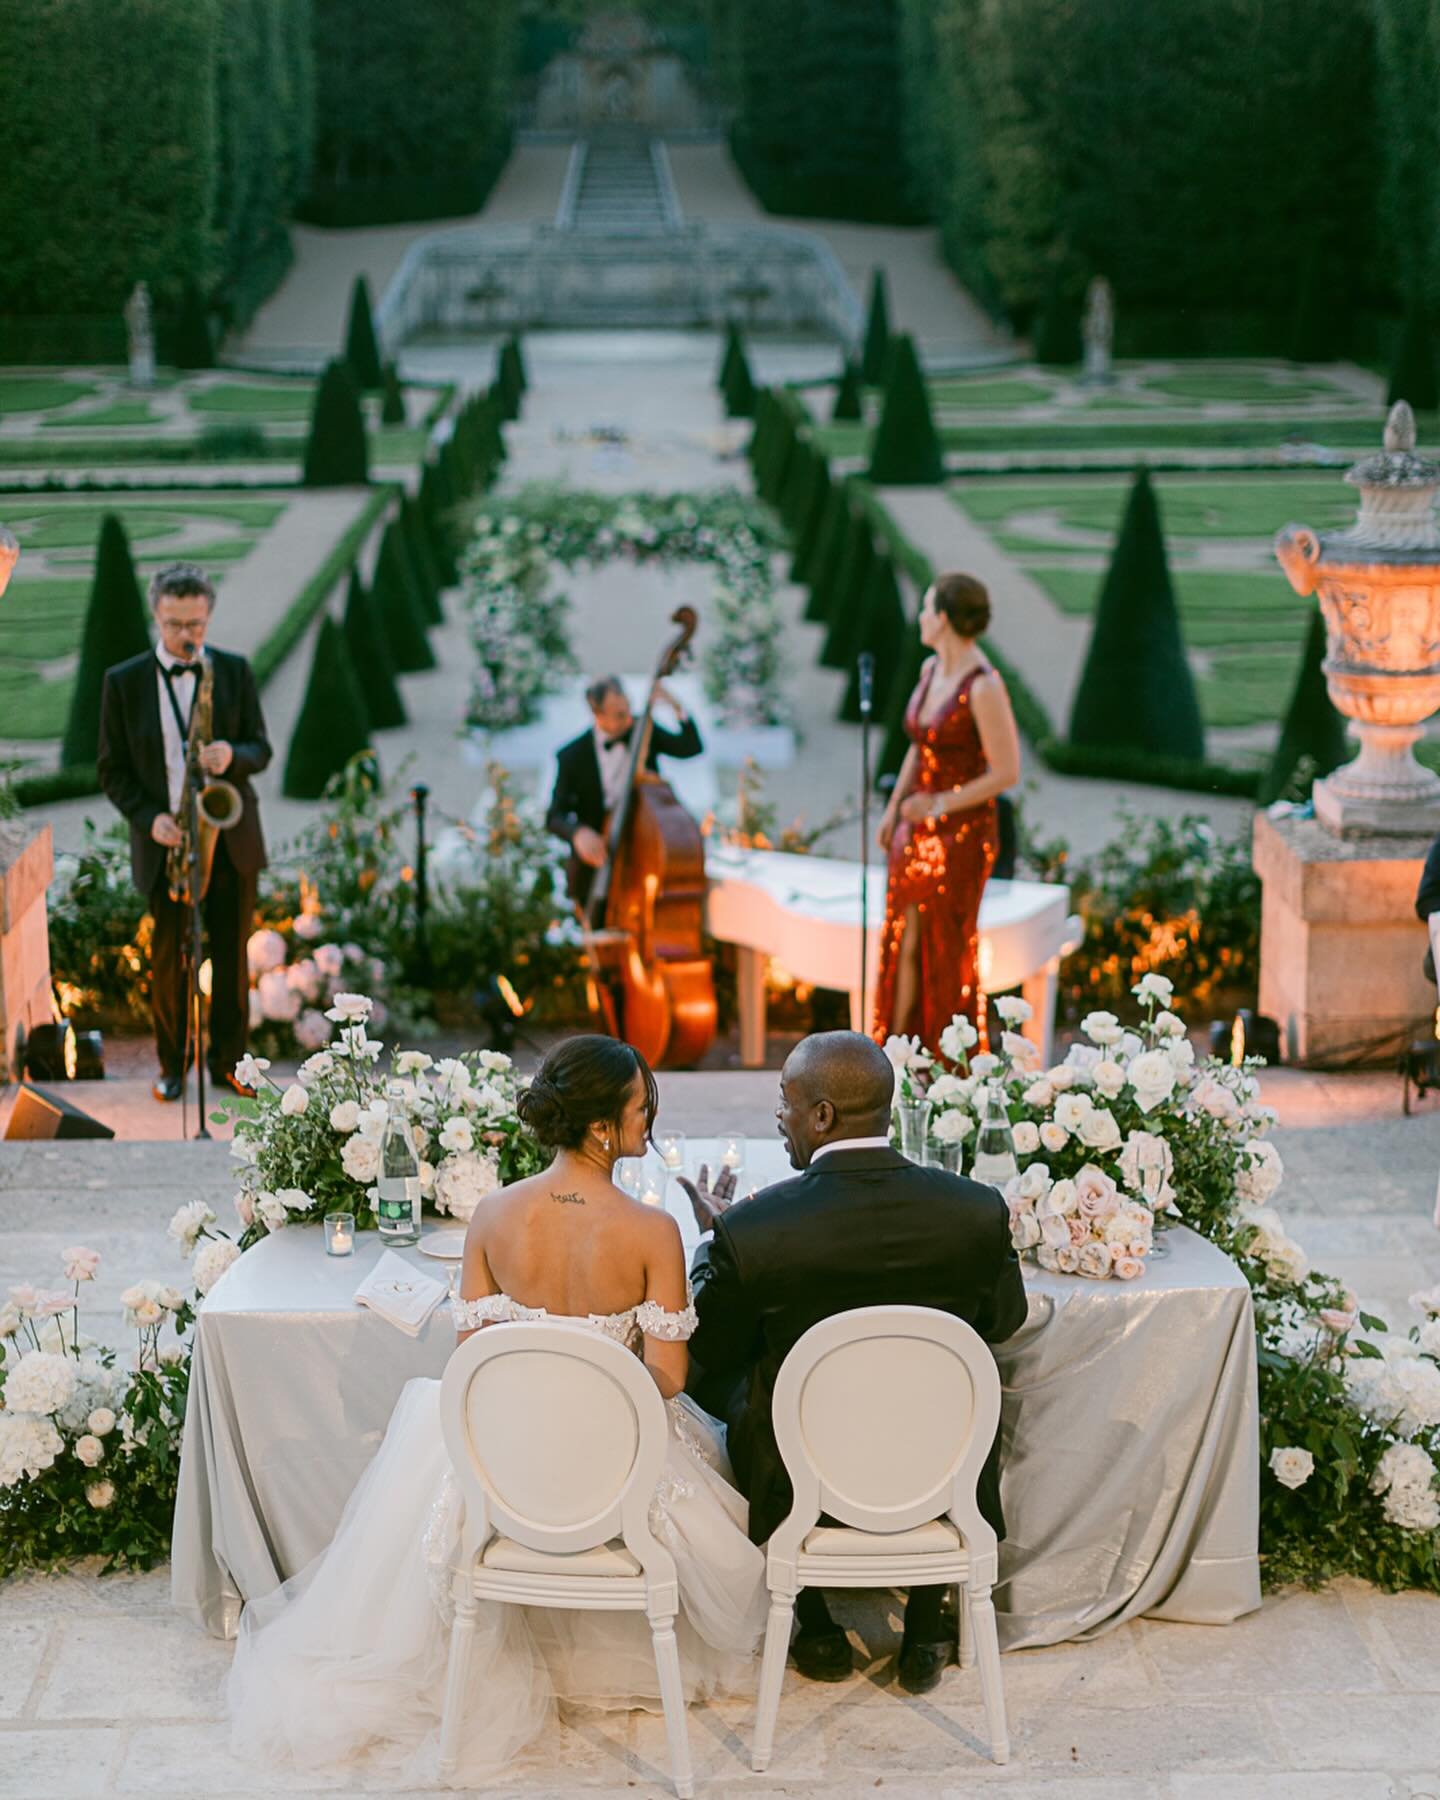 Our passion lies in crafting celebrations that not only look beautiful but feel meaningful. Each event is an opportunity to create lasting connections and celebrate the joy of togetherness with an elevated touch of elegance.

Learn more about how we 